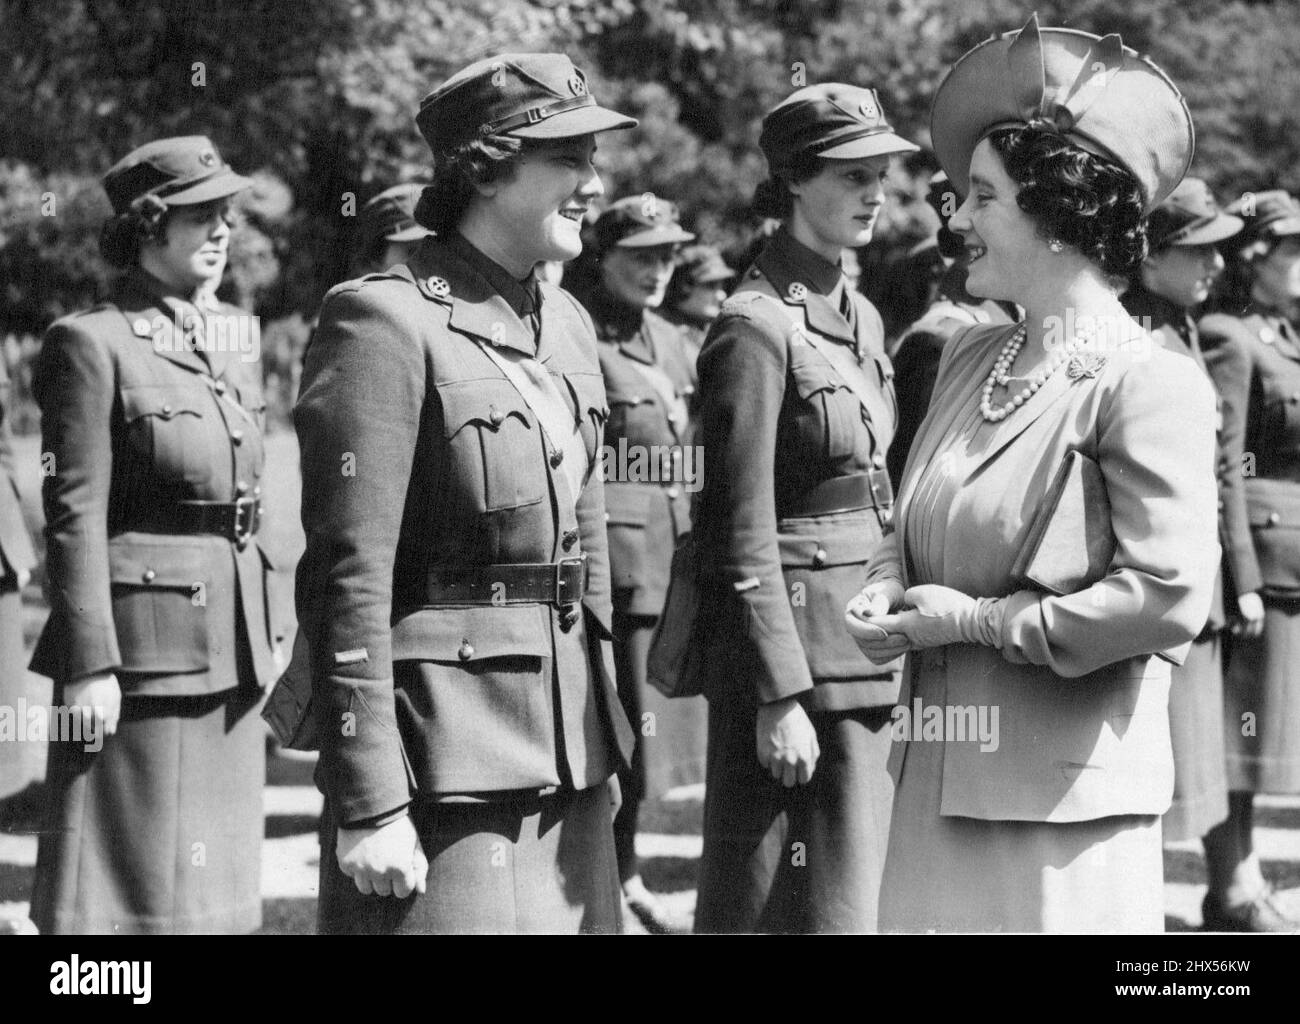 Queen Inspects Women Drivers - The Queen as she inspected the women ambulance drivers. Queen Elizabeth inspected a contingent of women members of the Mechanical Transport Corps in the gardens of Buckingham Palace, London. Three ambulances - presented by Hollywood film players were at the inspection. The Corps will take the ambulances overseas. May 21, 1940. Stock Photo